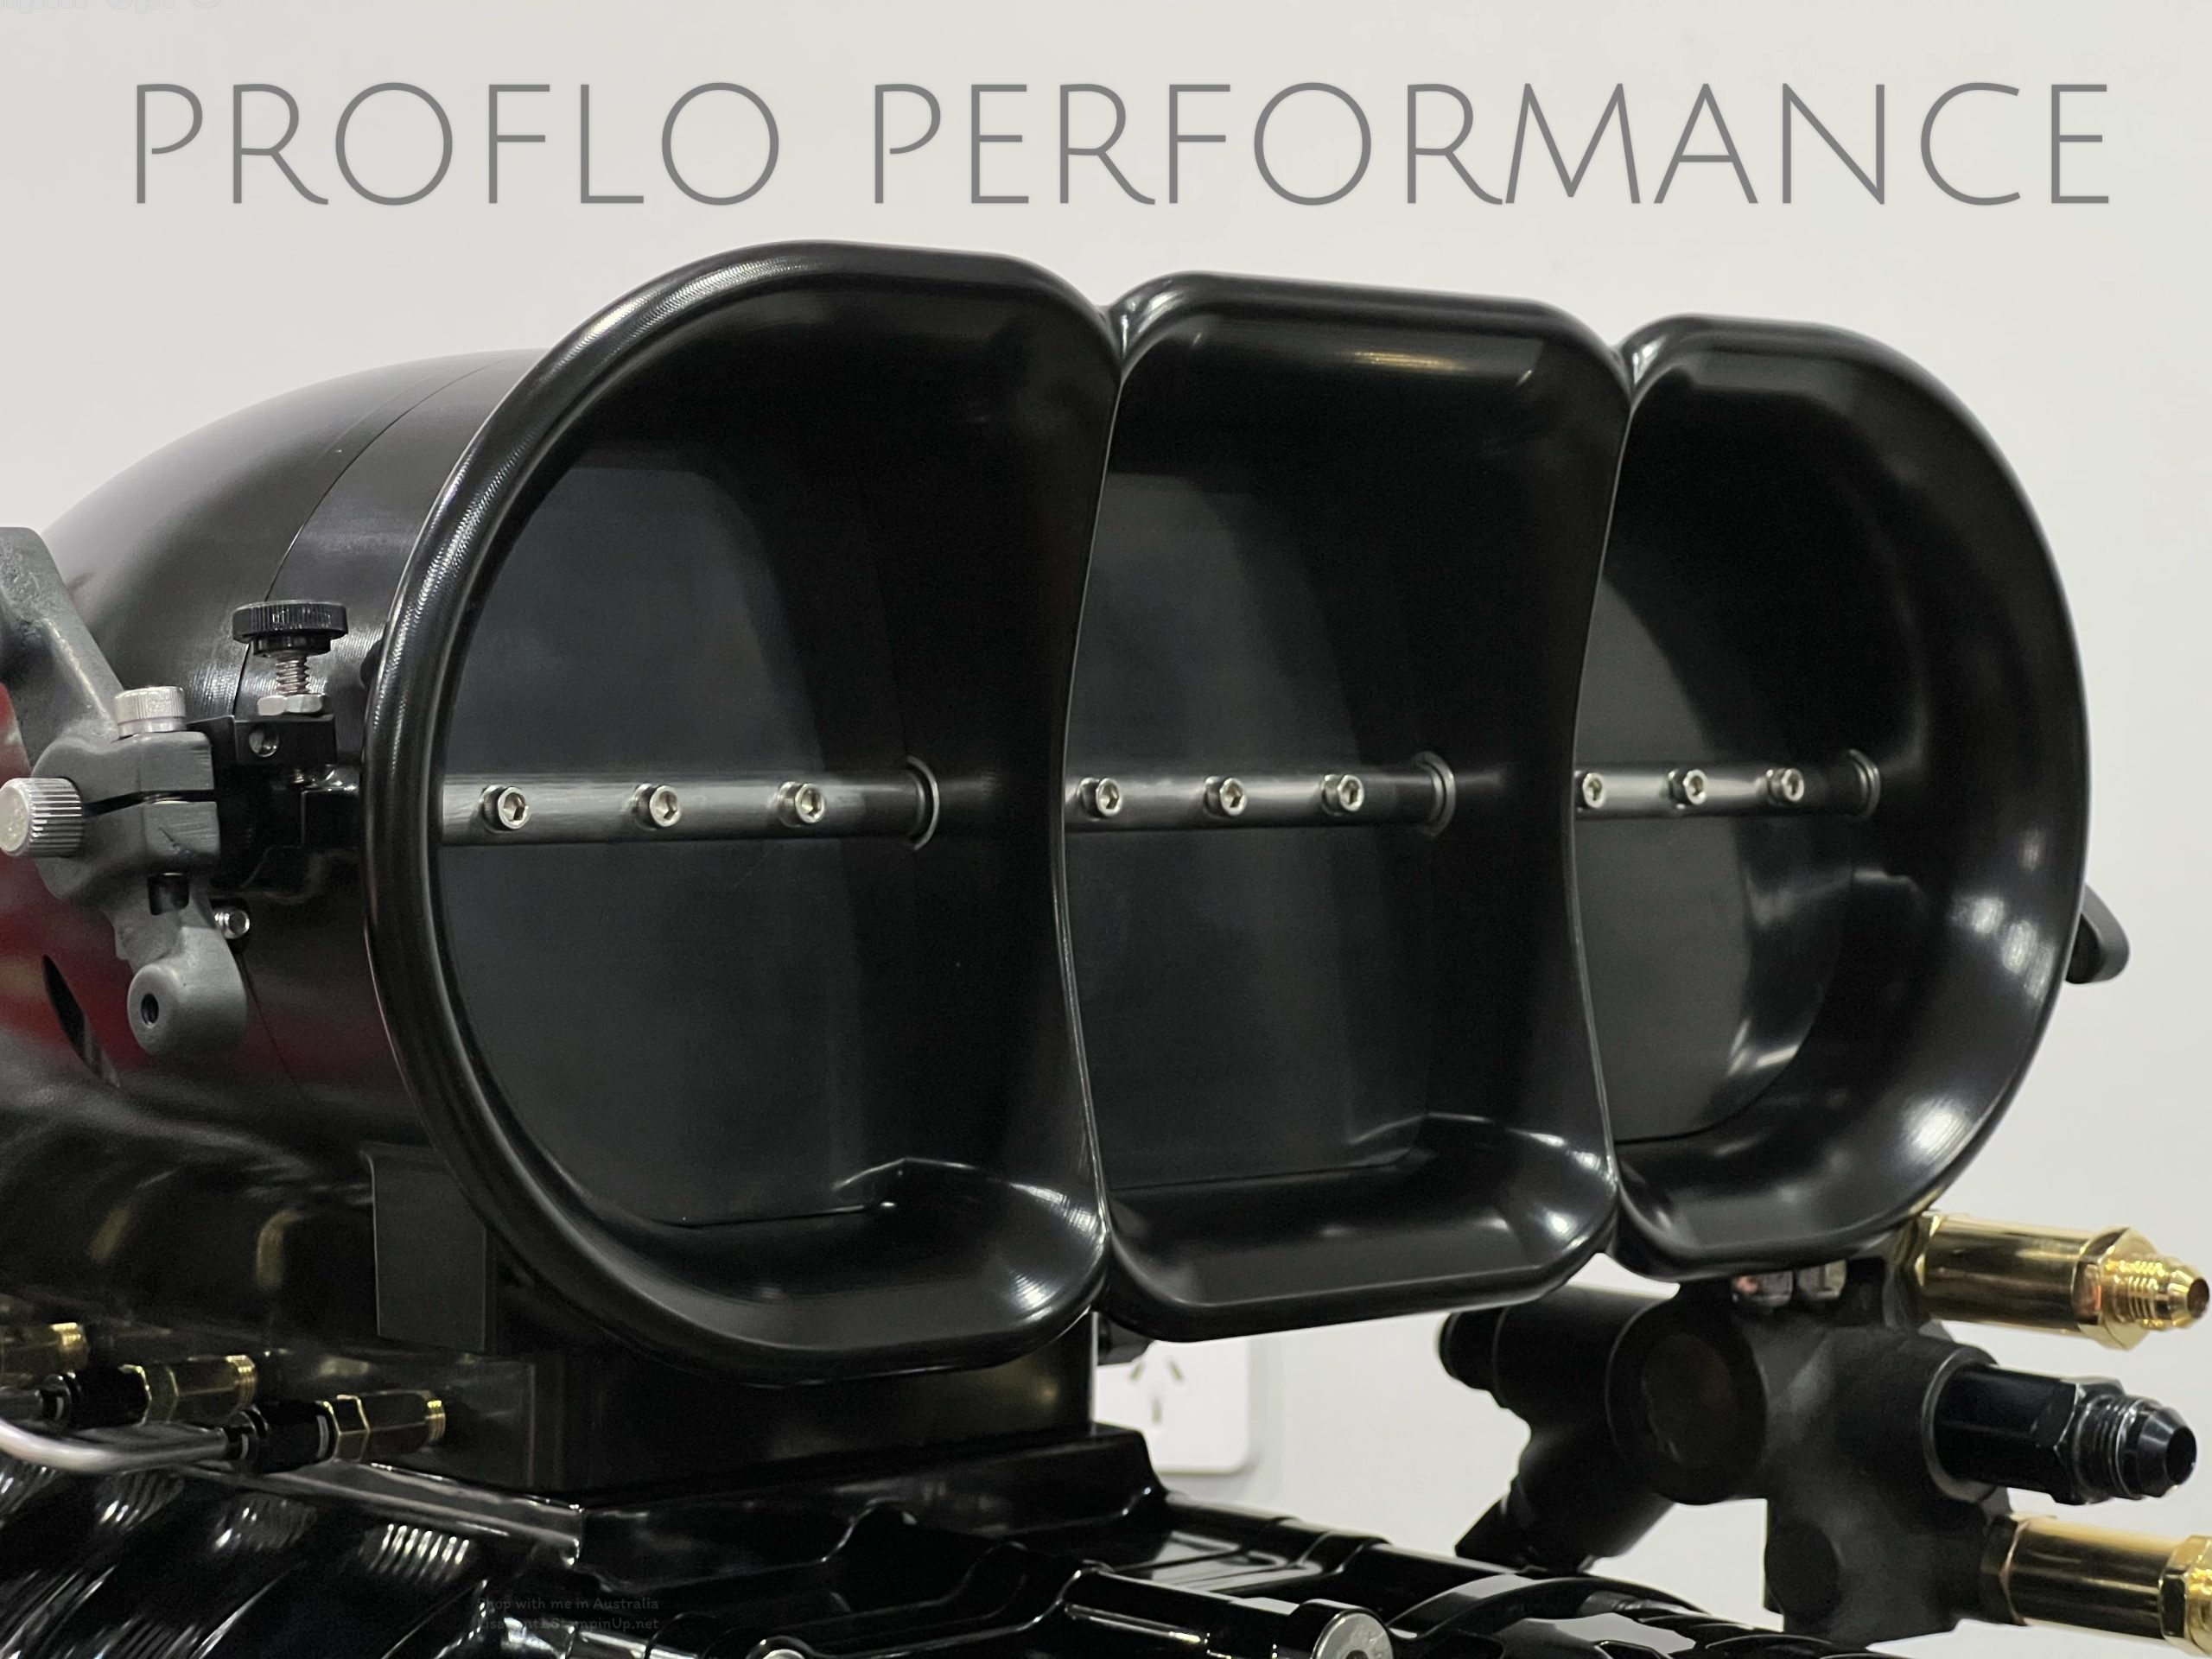 PFP PRODUCTS BILLET INJECTOR HAT | Proflo Performance